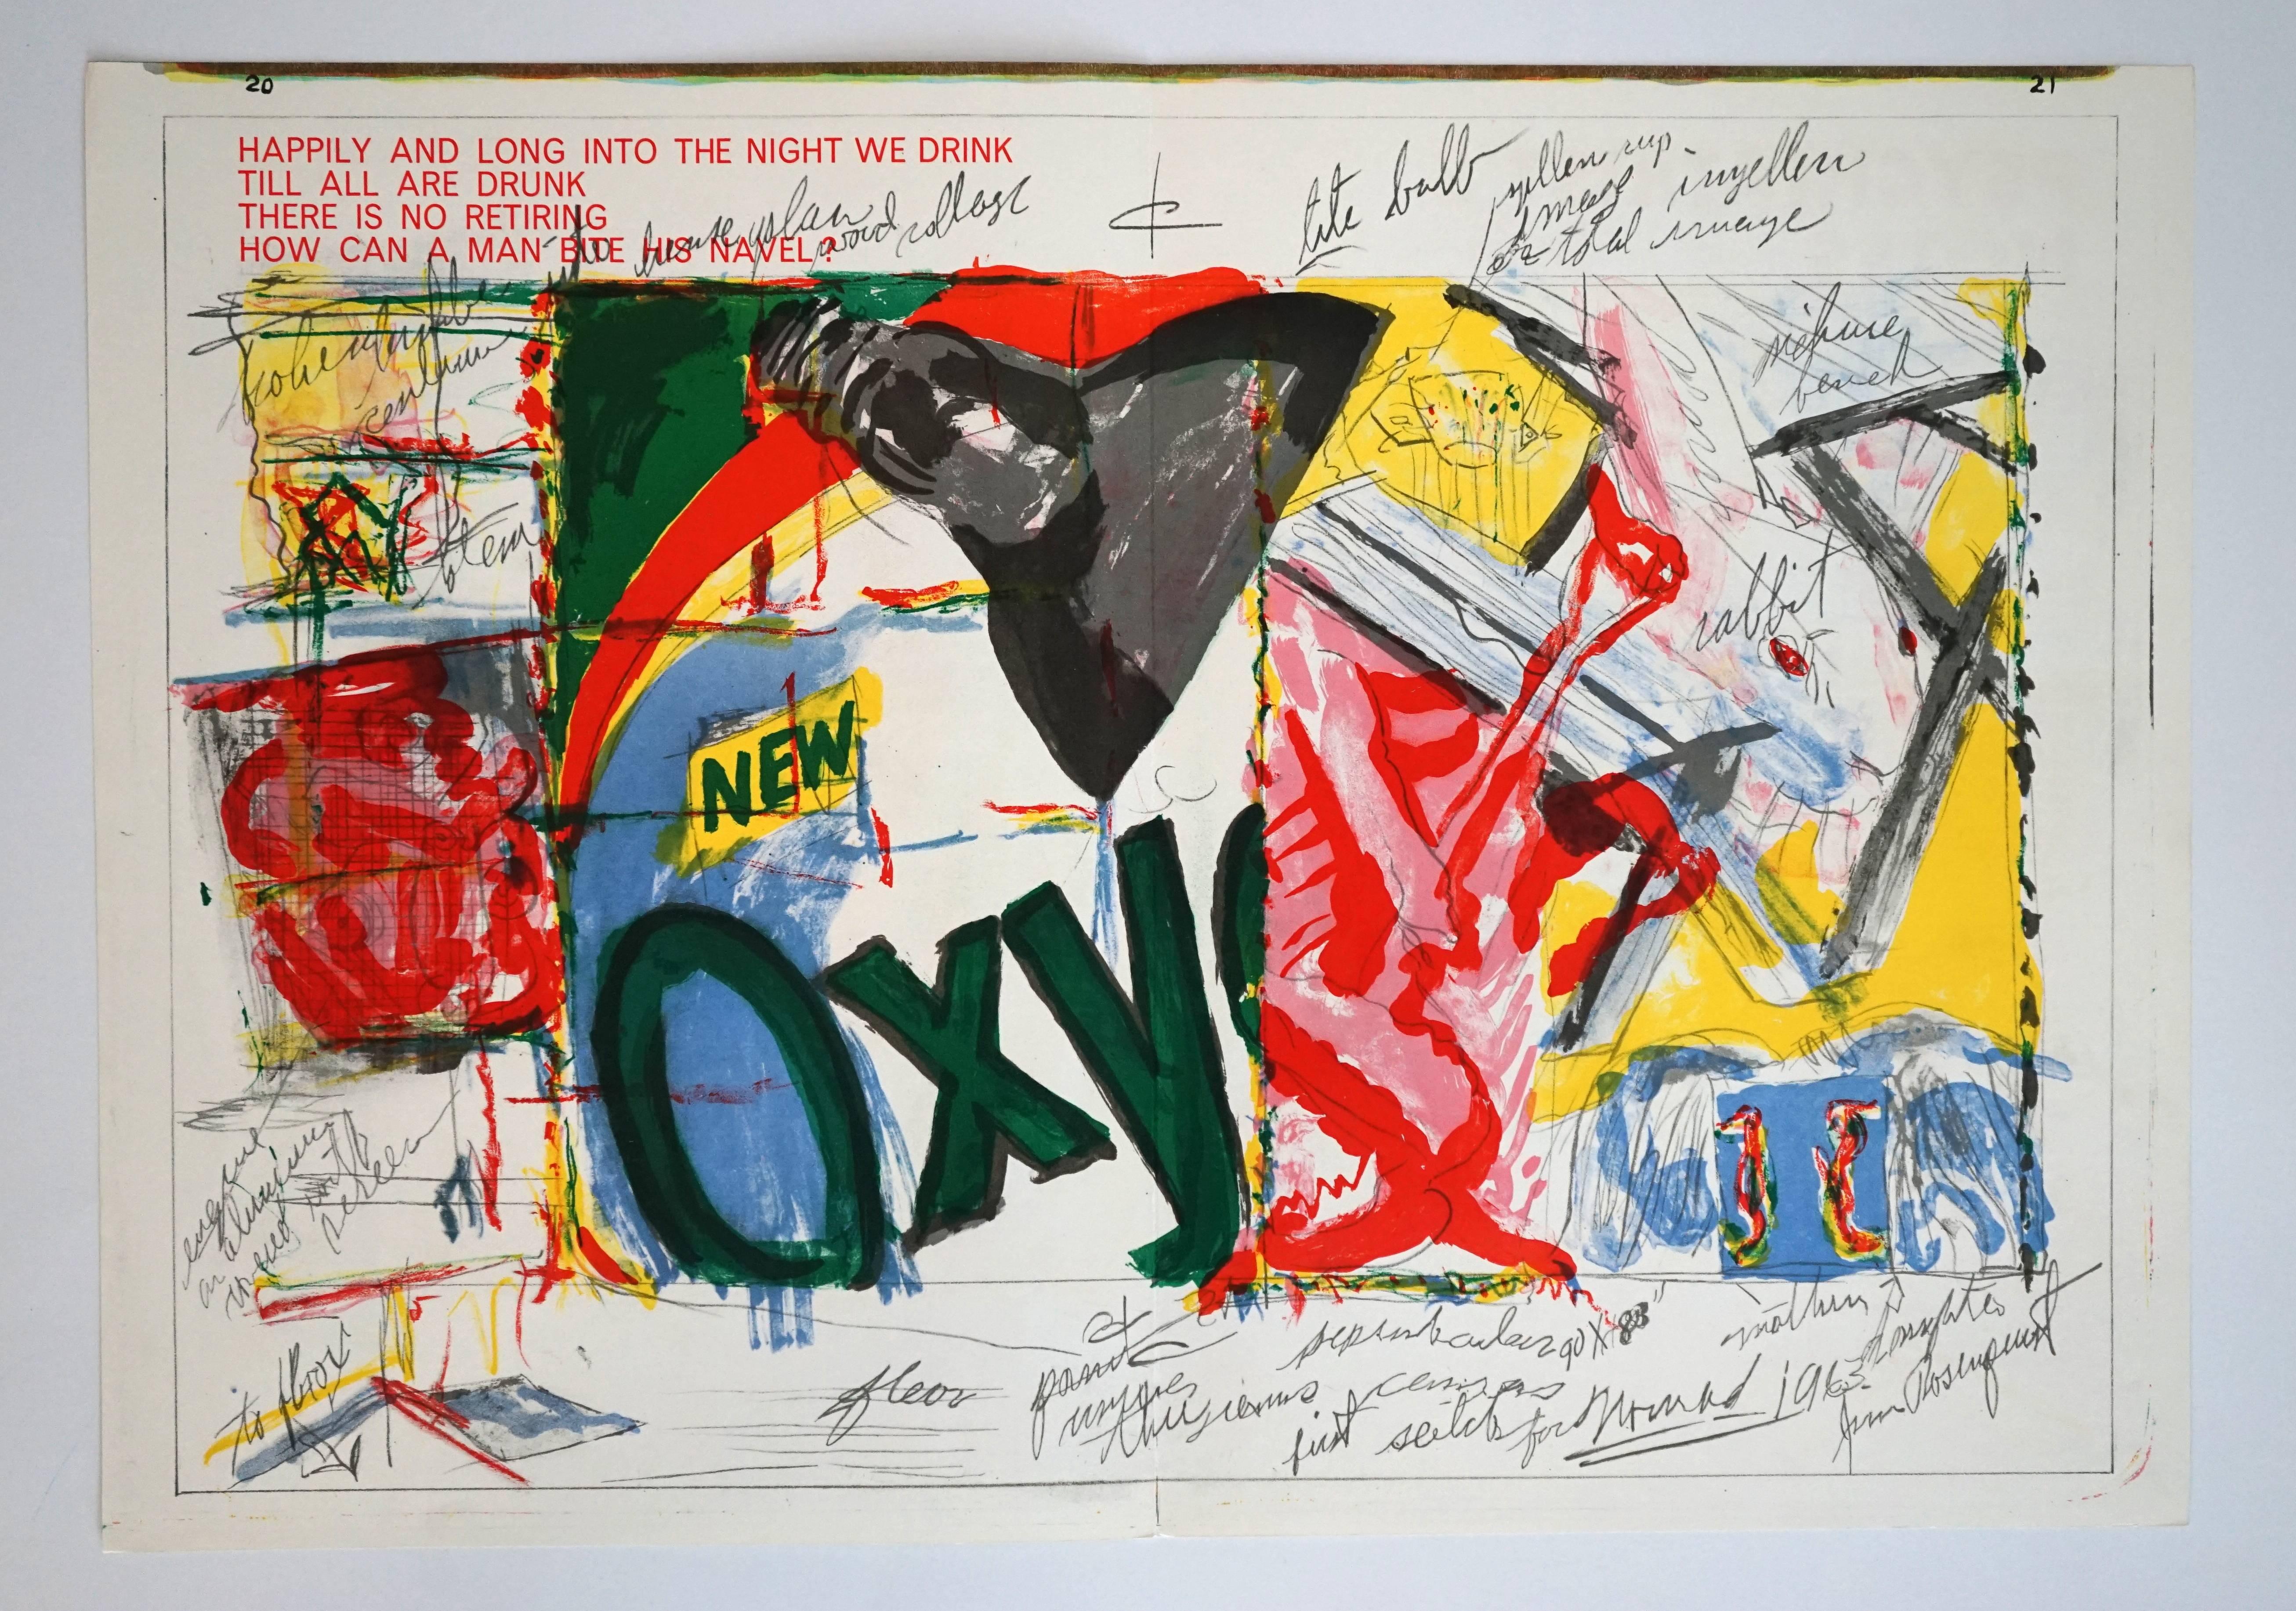 James Rosenquist Abstract Print - Oxy, from One Cent Life